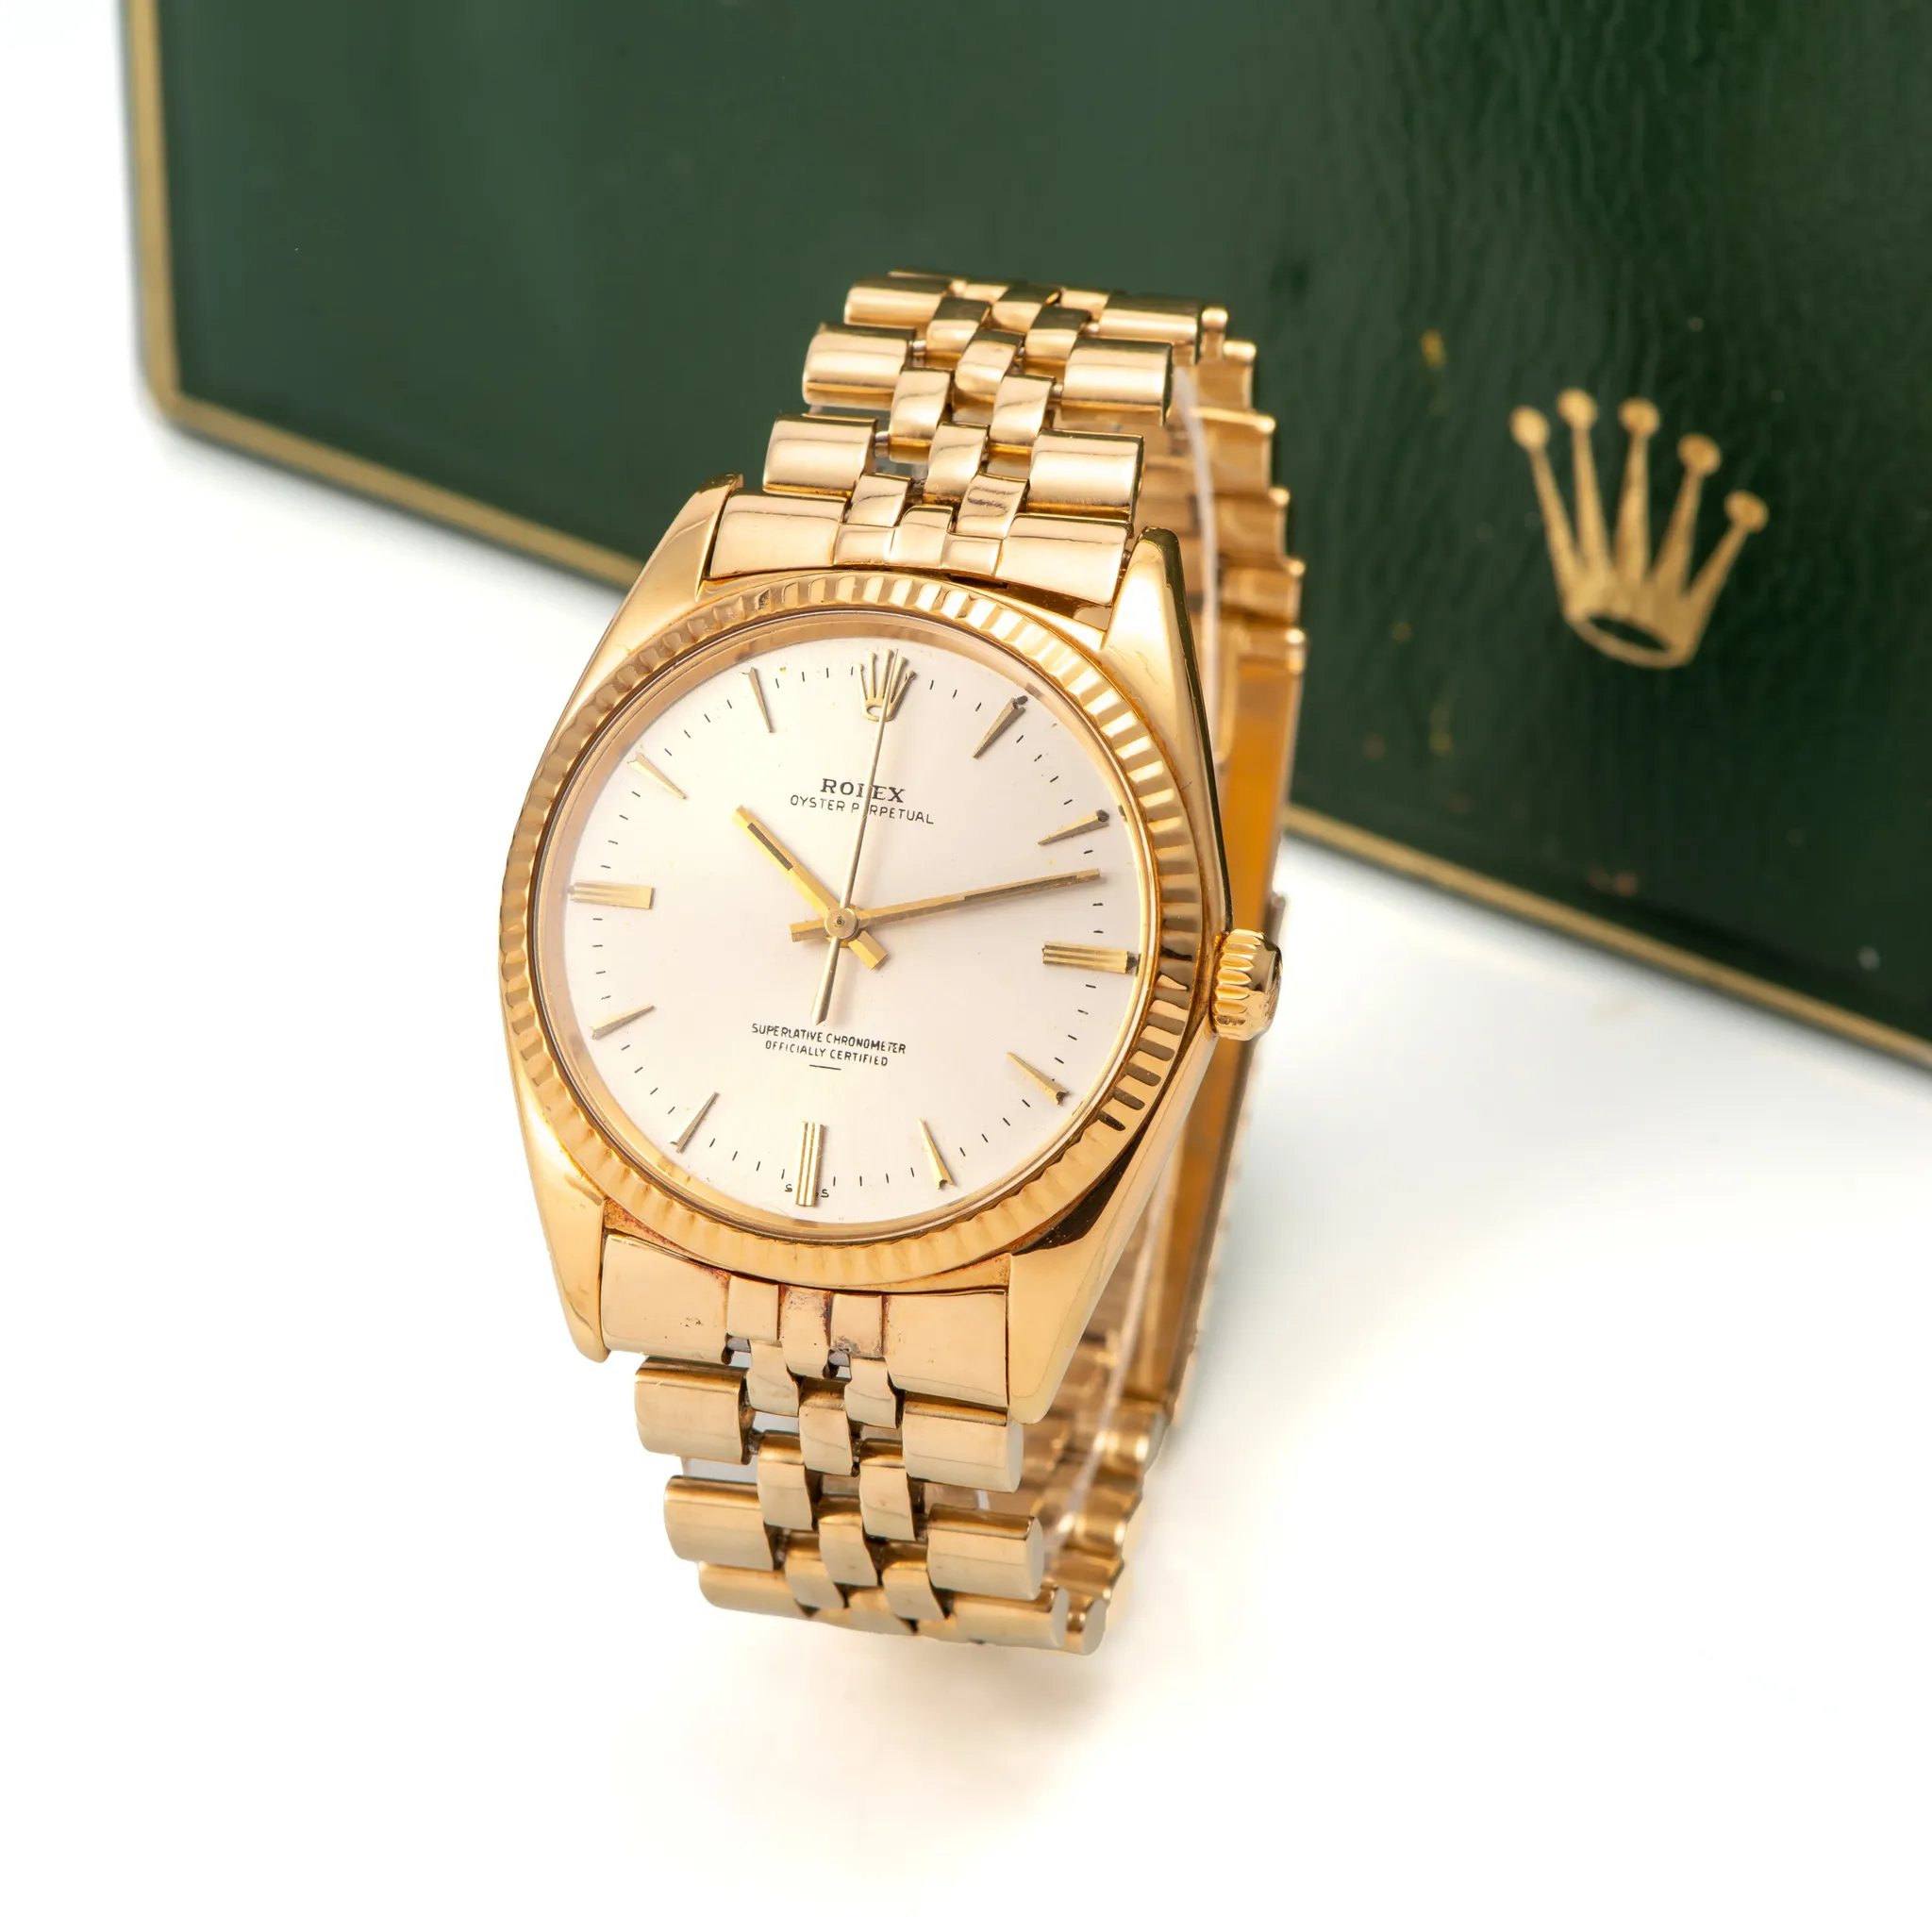 Rolex Oyster Perpetual 36 1013